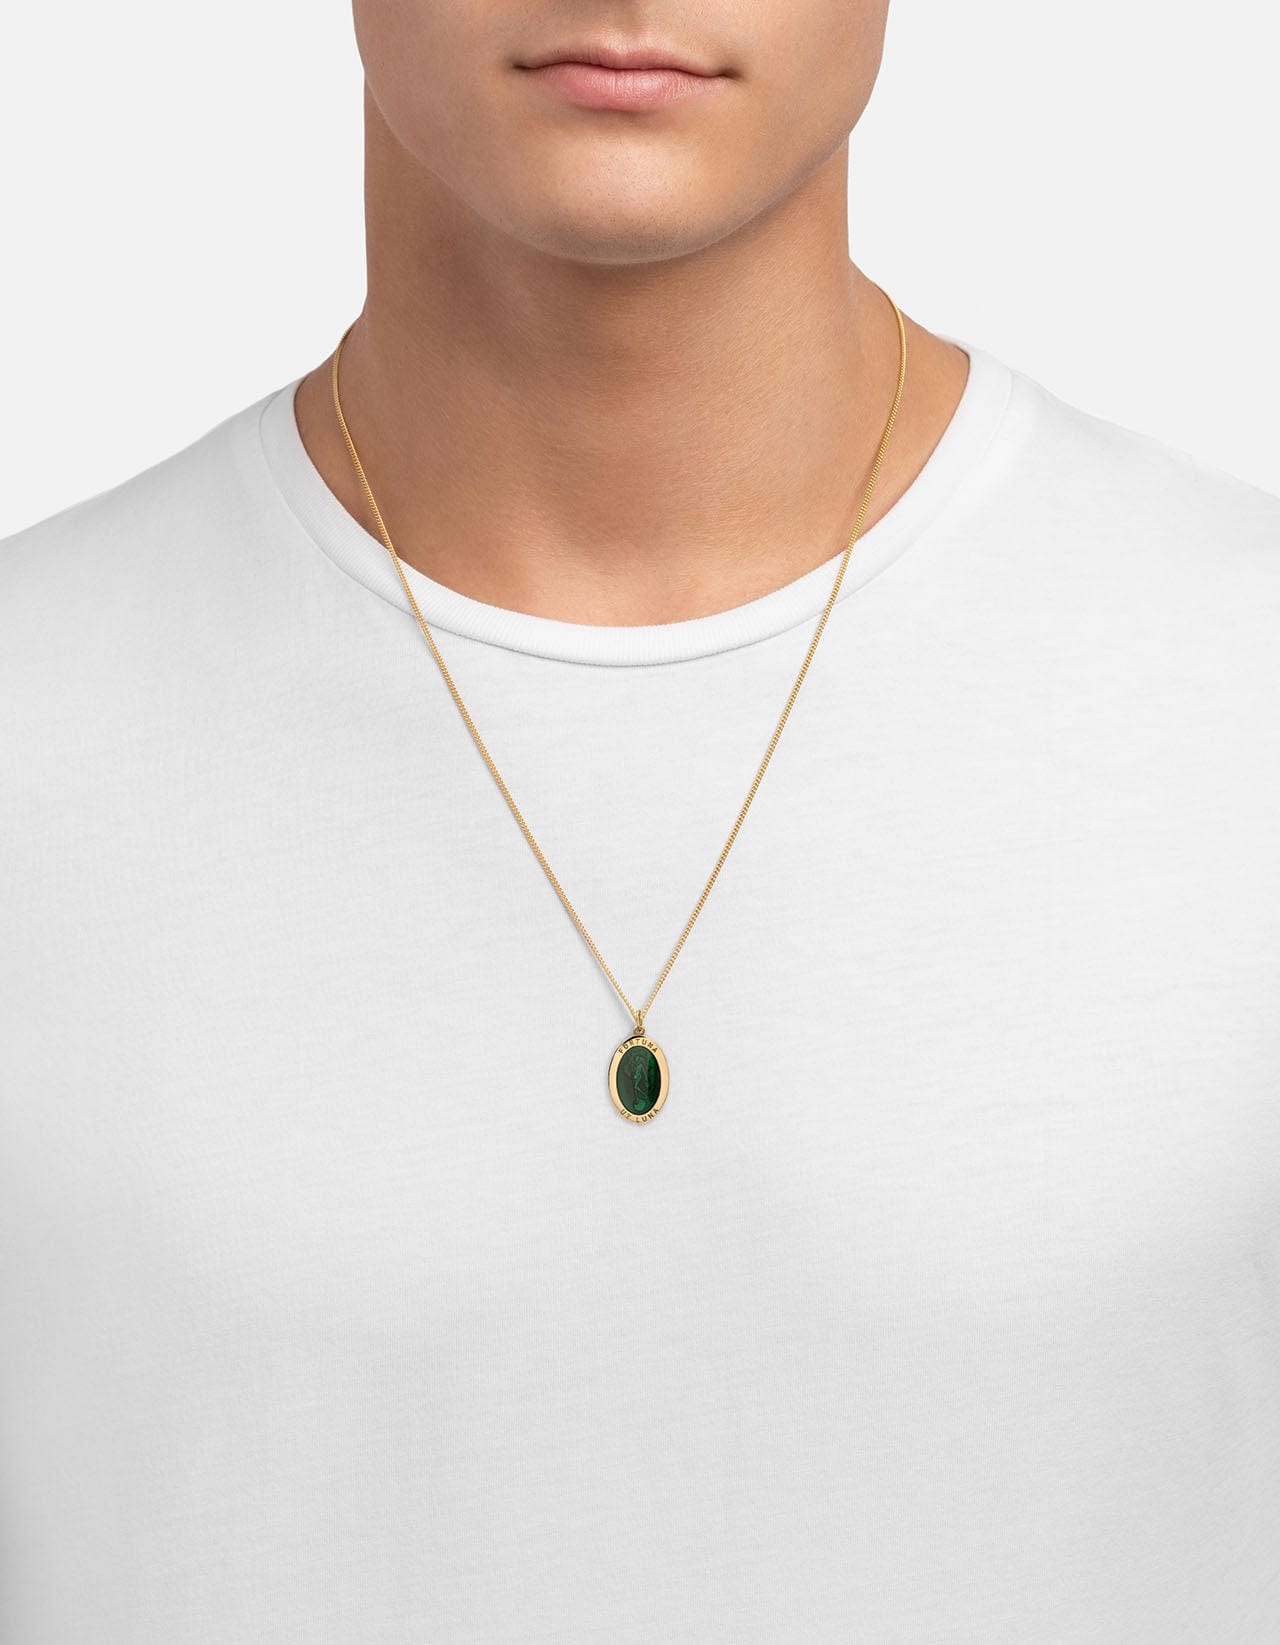 Teal Green Stone Pendant Necklace Sea Glass Chalcedony Gold Plated Silver -  Walmart.com